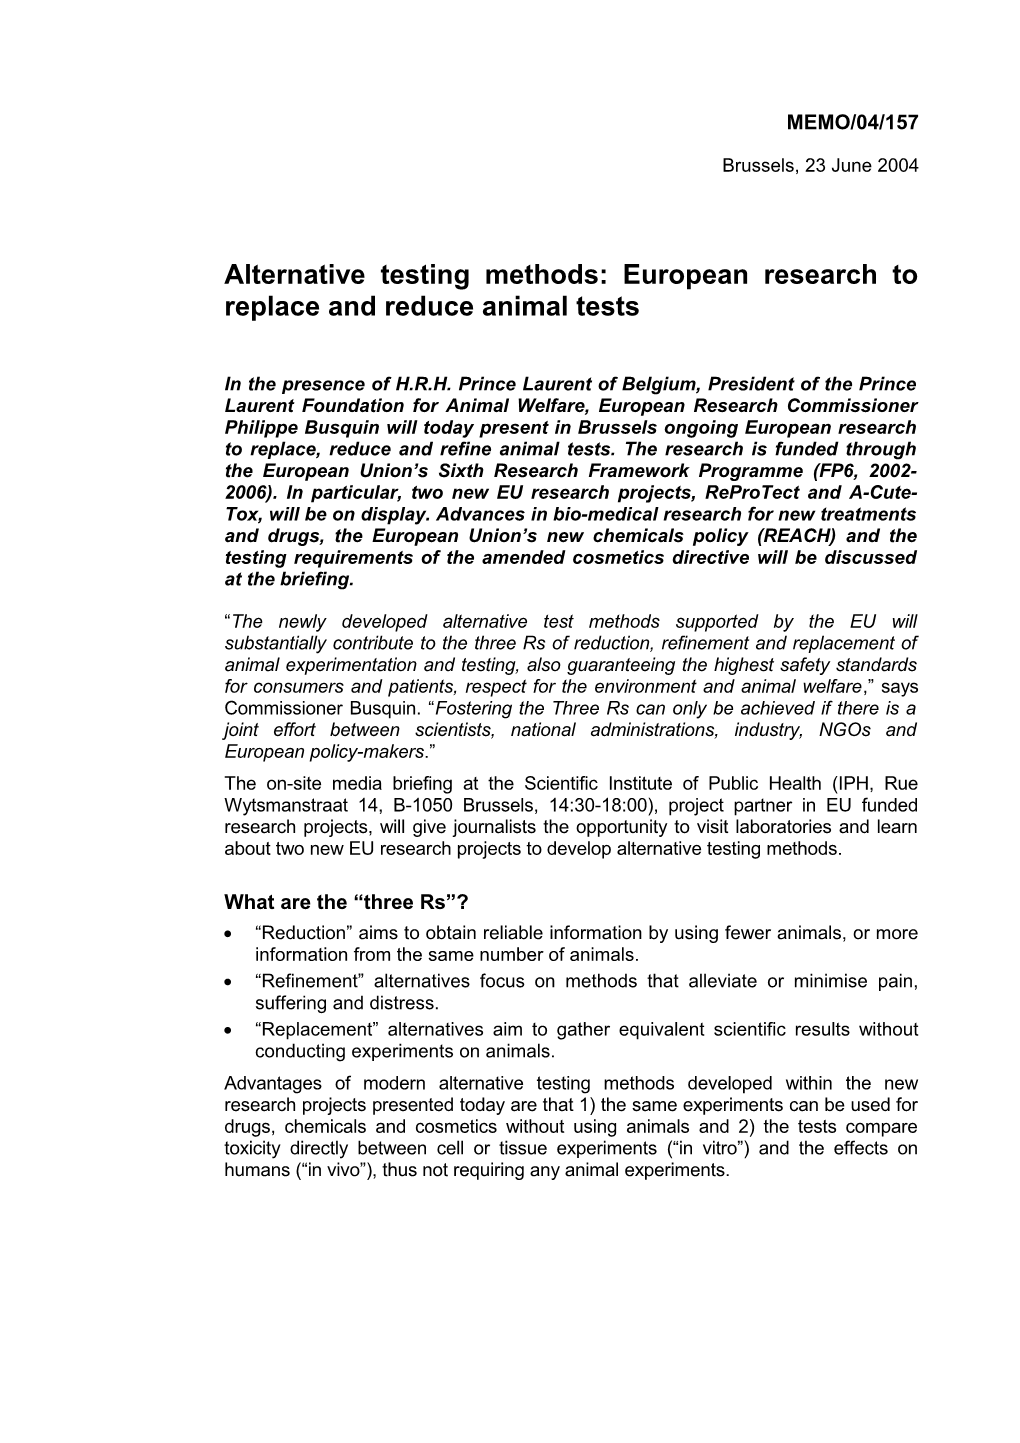 Alternative Testing Methods: European Research to Replace and Reduce Animal Tests